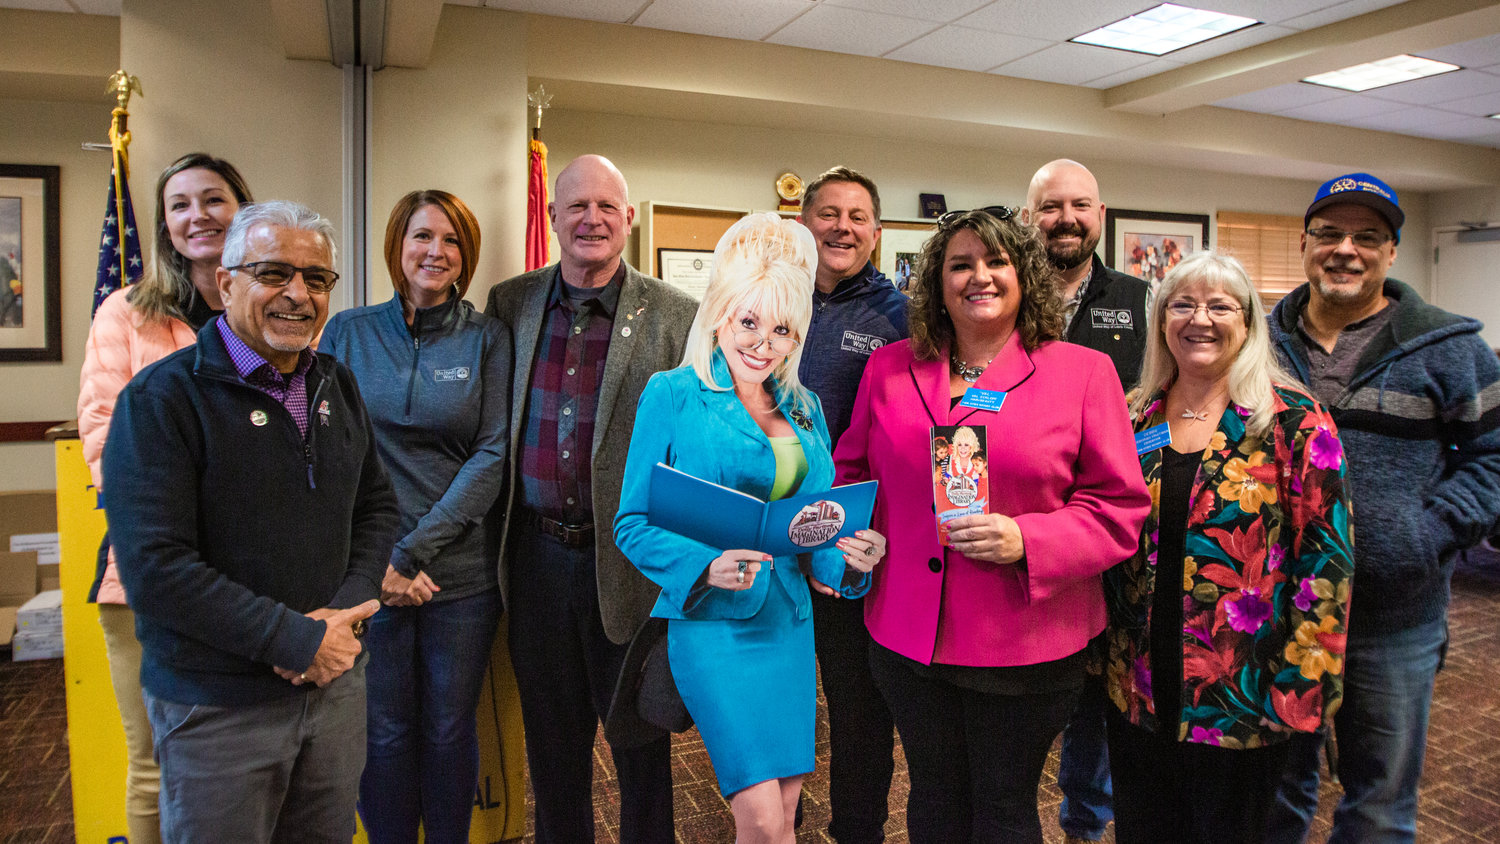 Rotarians and staff from United Way stand with a cardboard cutout of Dolly Parton to celebrate the three-year anniversary of the Dolly Parton Imagination Library being kicked off in Lewis County at the Holiday Inn in Chehalis on last November. The program provides books for young kids at no cost to the families.